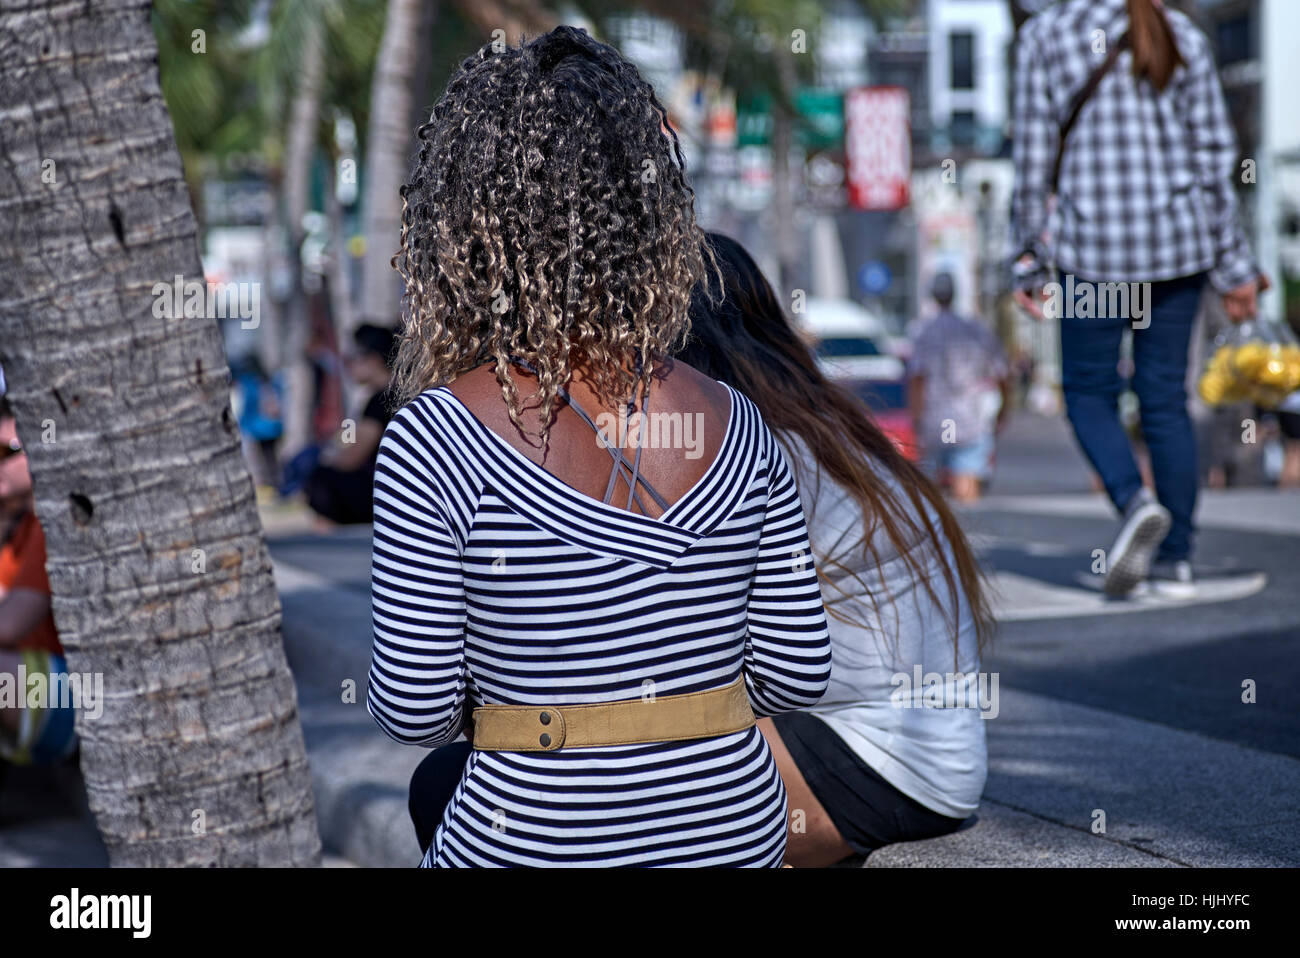 Hair. Woman with a frizzy Afro Caribbean hairstyle. Stock Photo